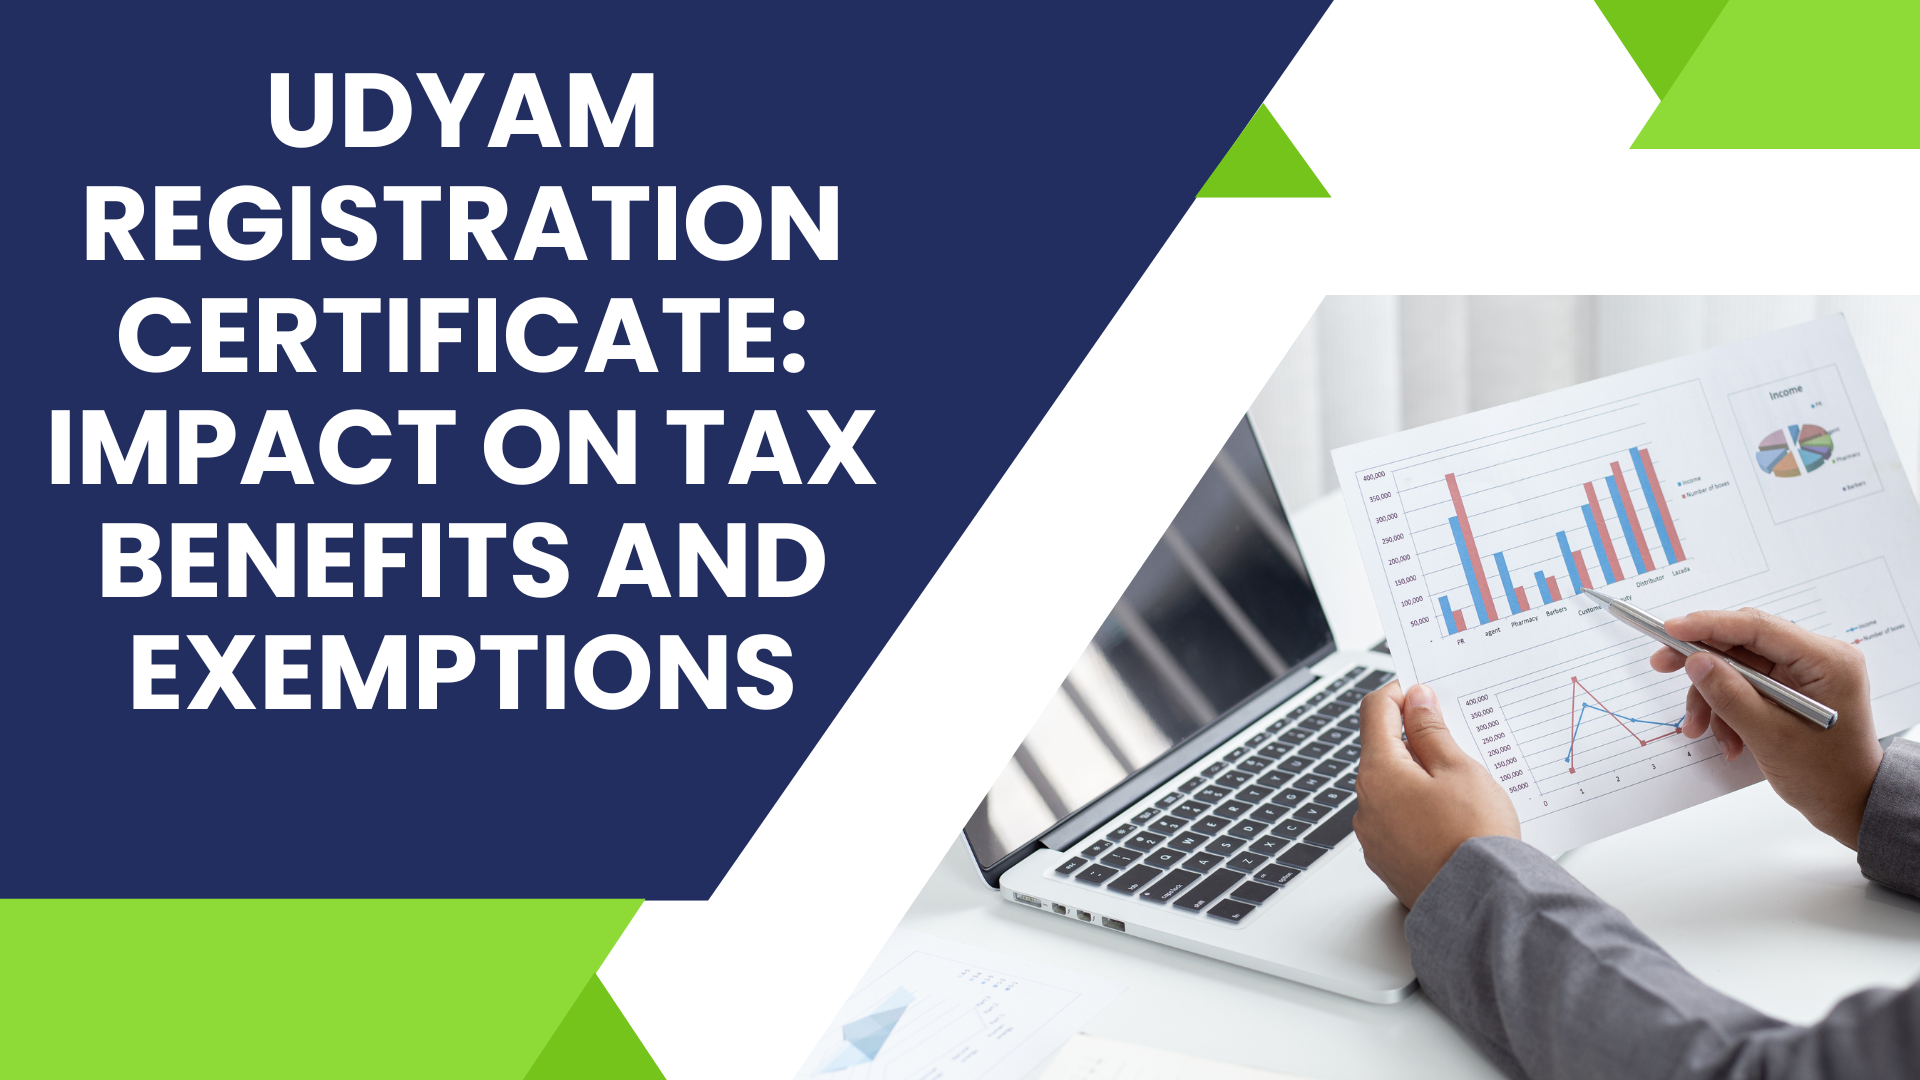 Udyam Registration Certificate Impact on Tax Benefits and Exemptions